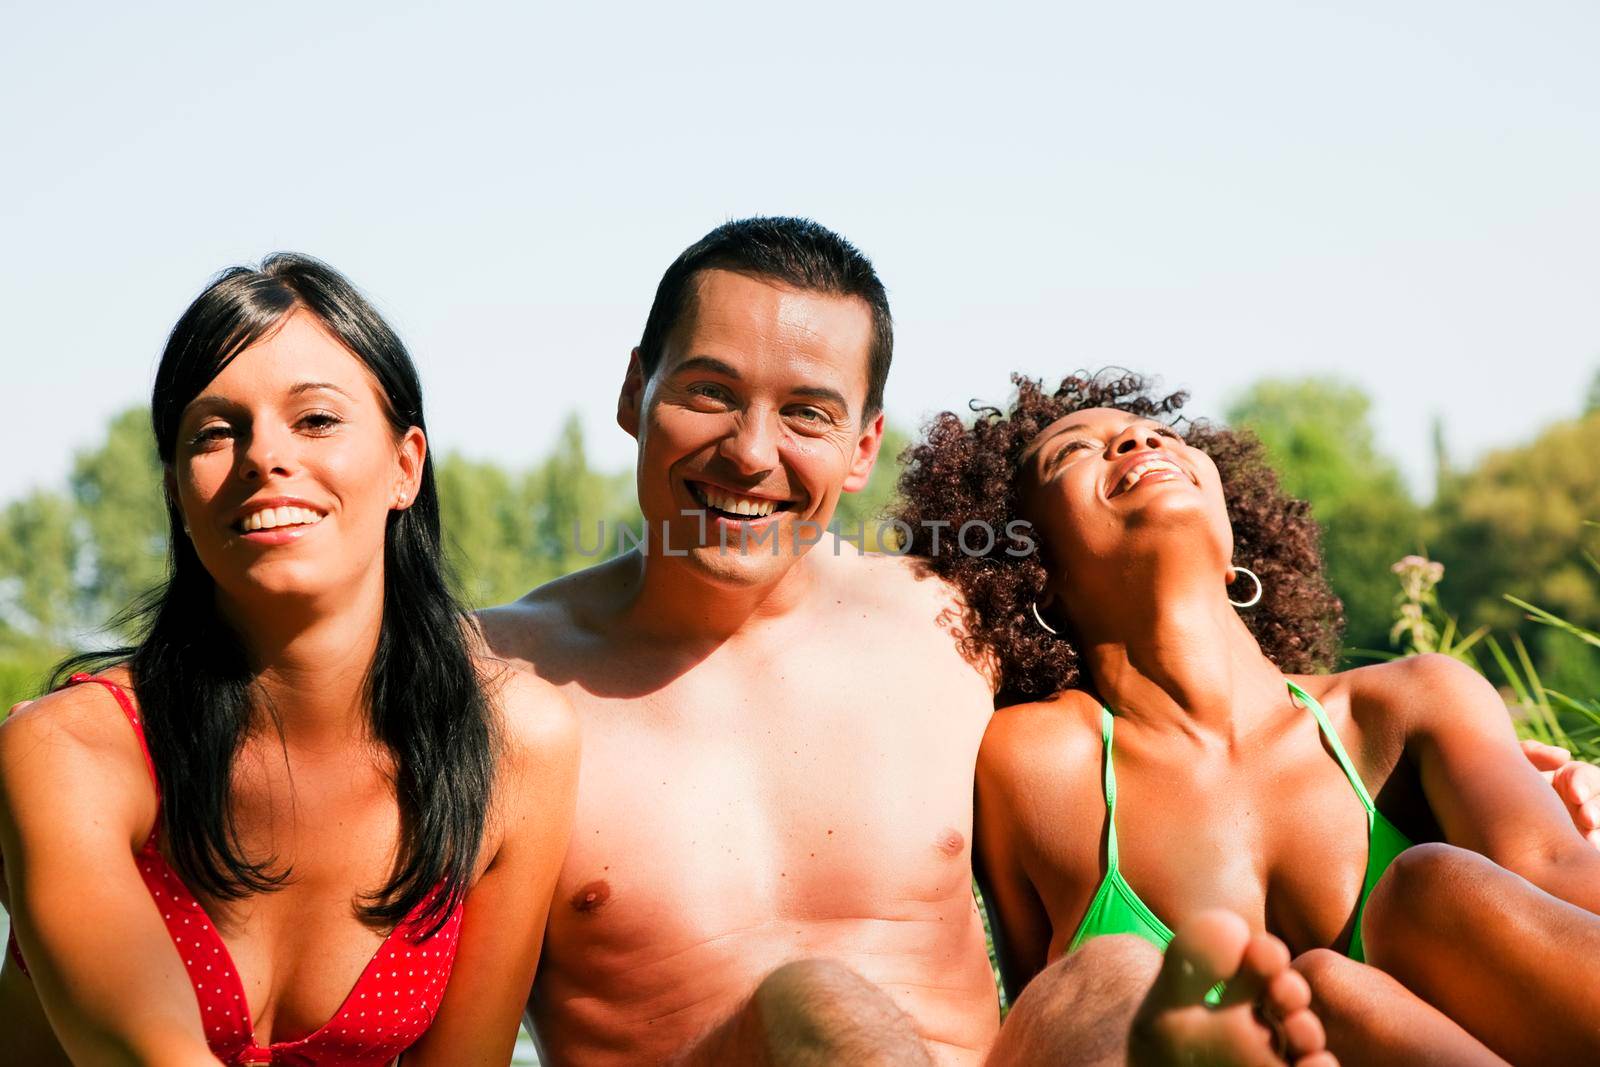 Group of friends - man and to women sitting in the sun in summer and having fun enjoying themselves